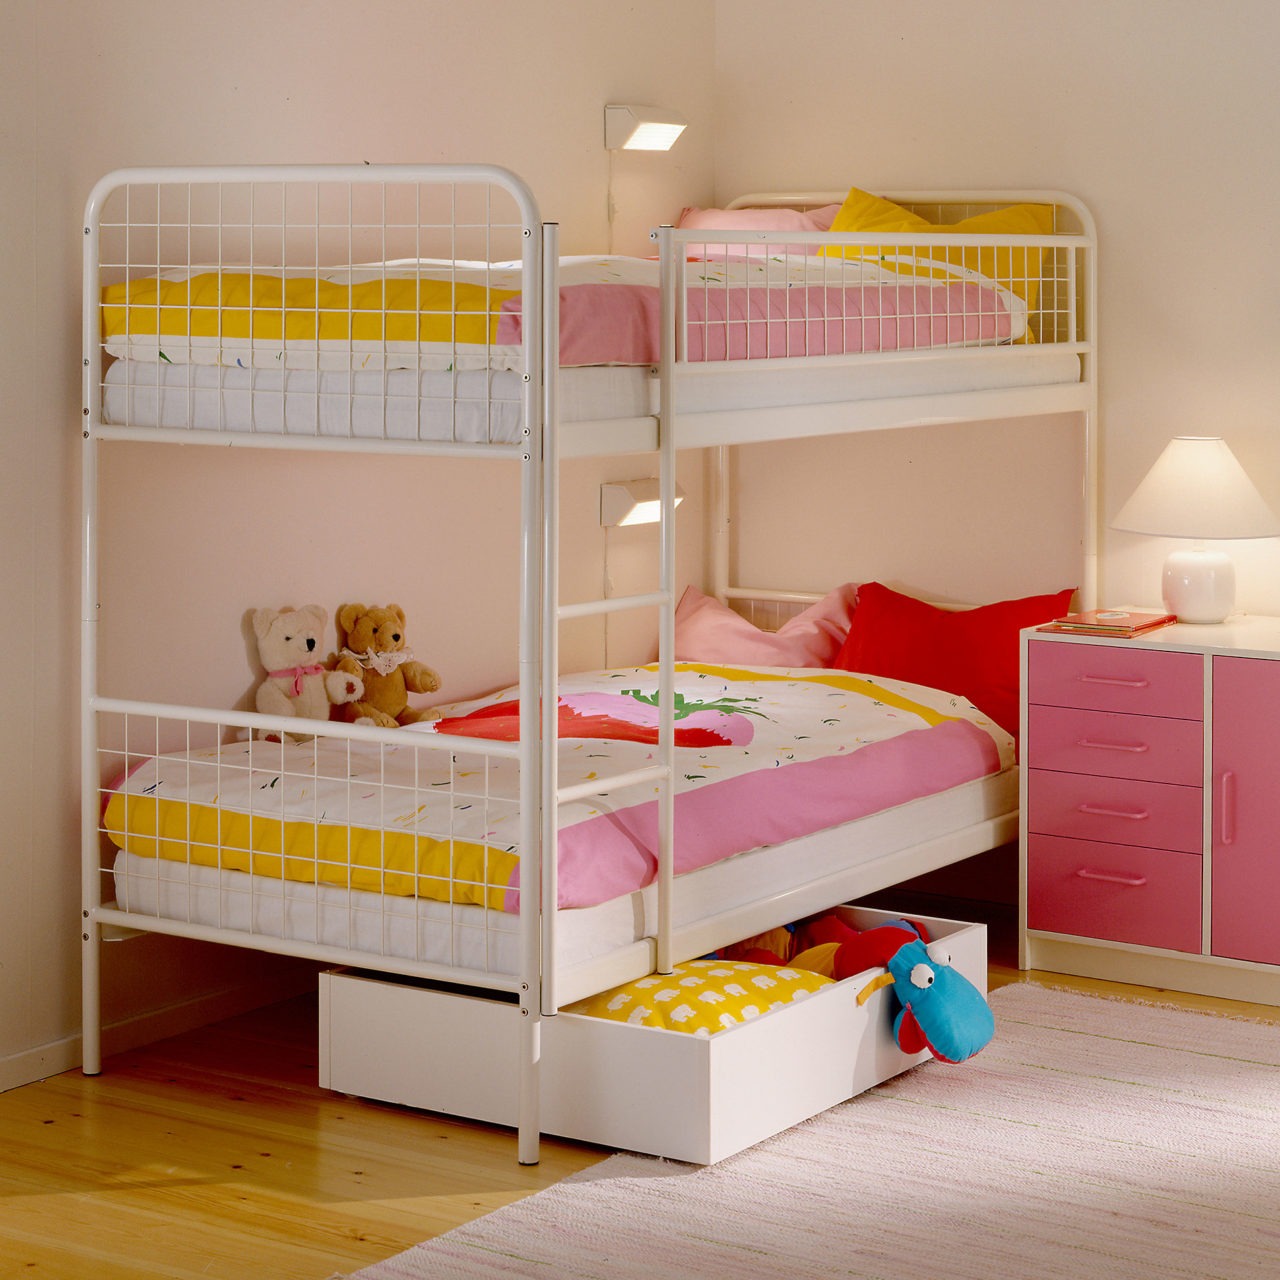 A children’s room where a neatly made MALM bunk bed, other furniture and details are pink, yellow and white.